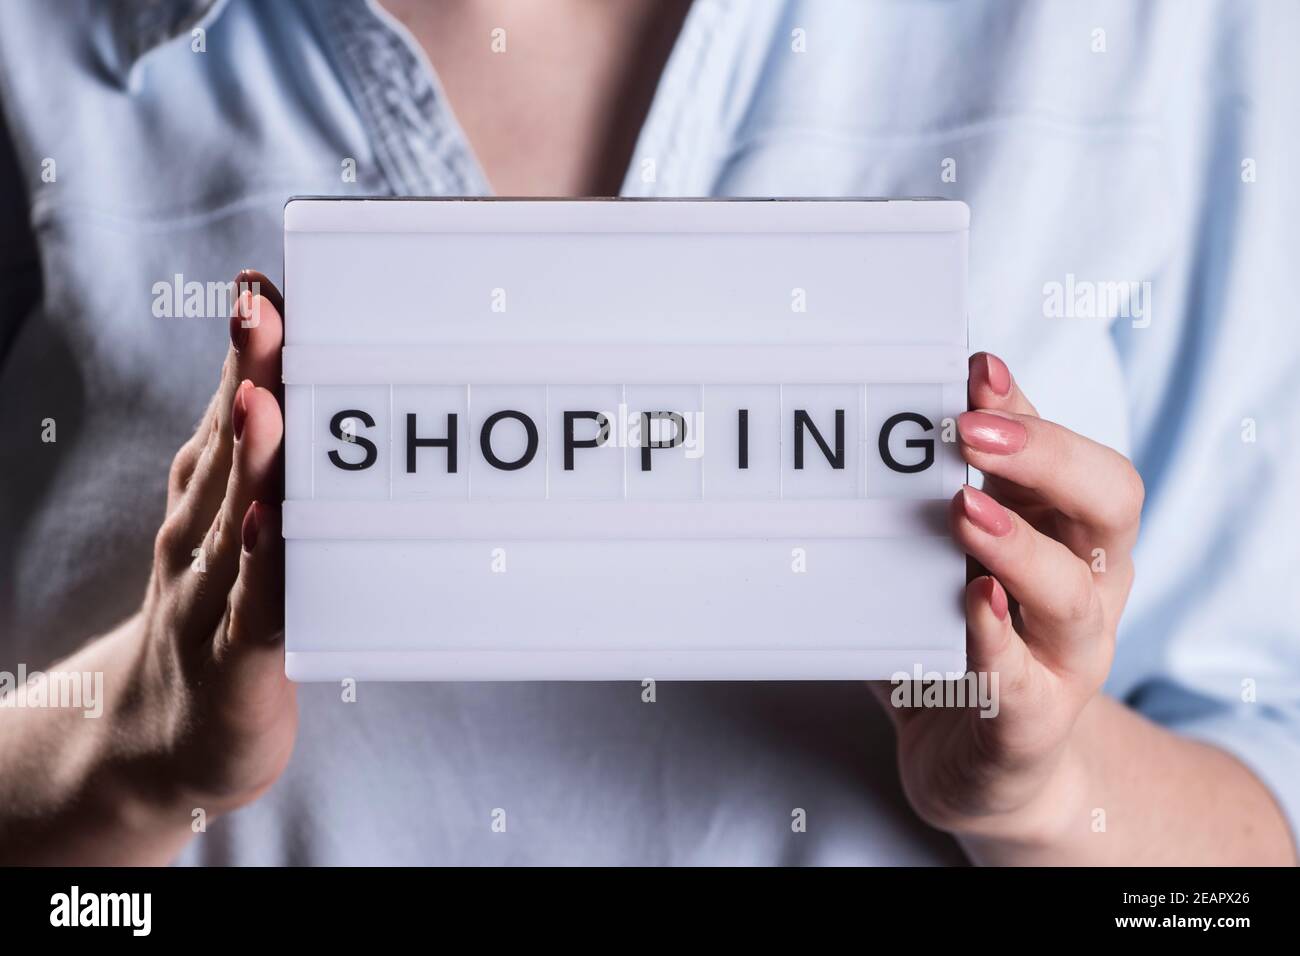 a shopping sign, business and economy Stock Photo